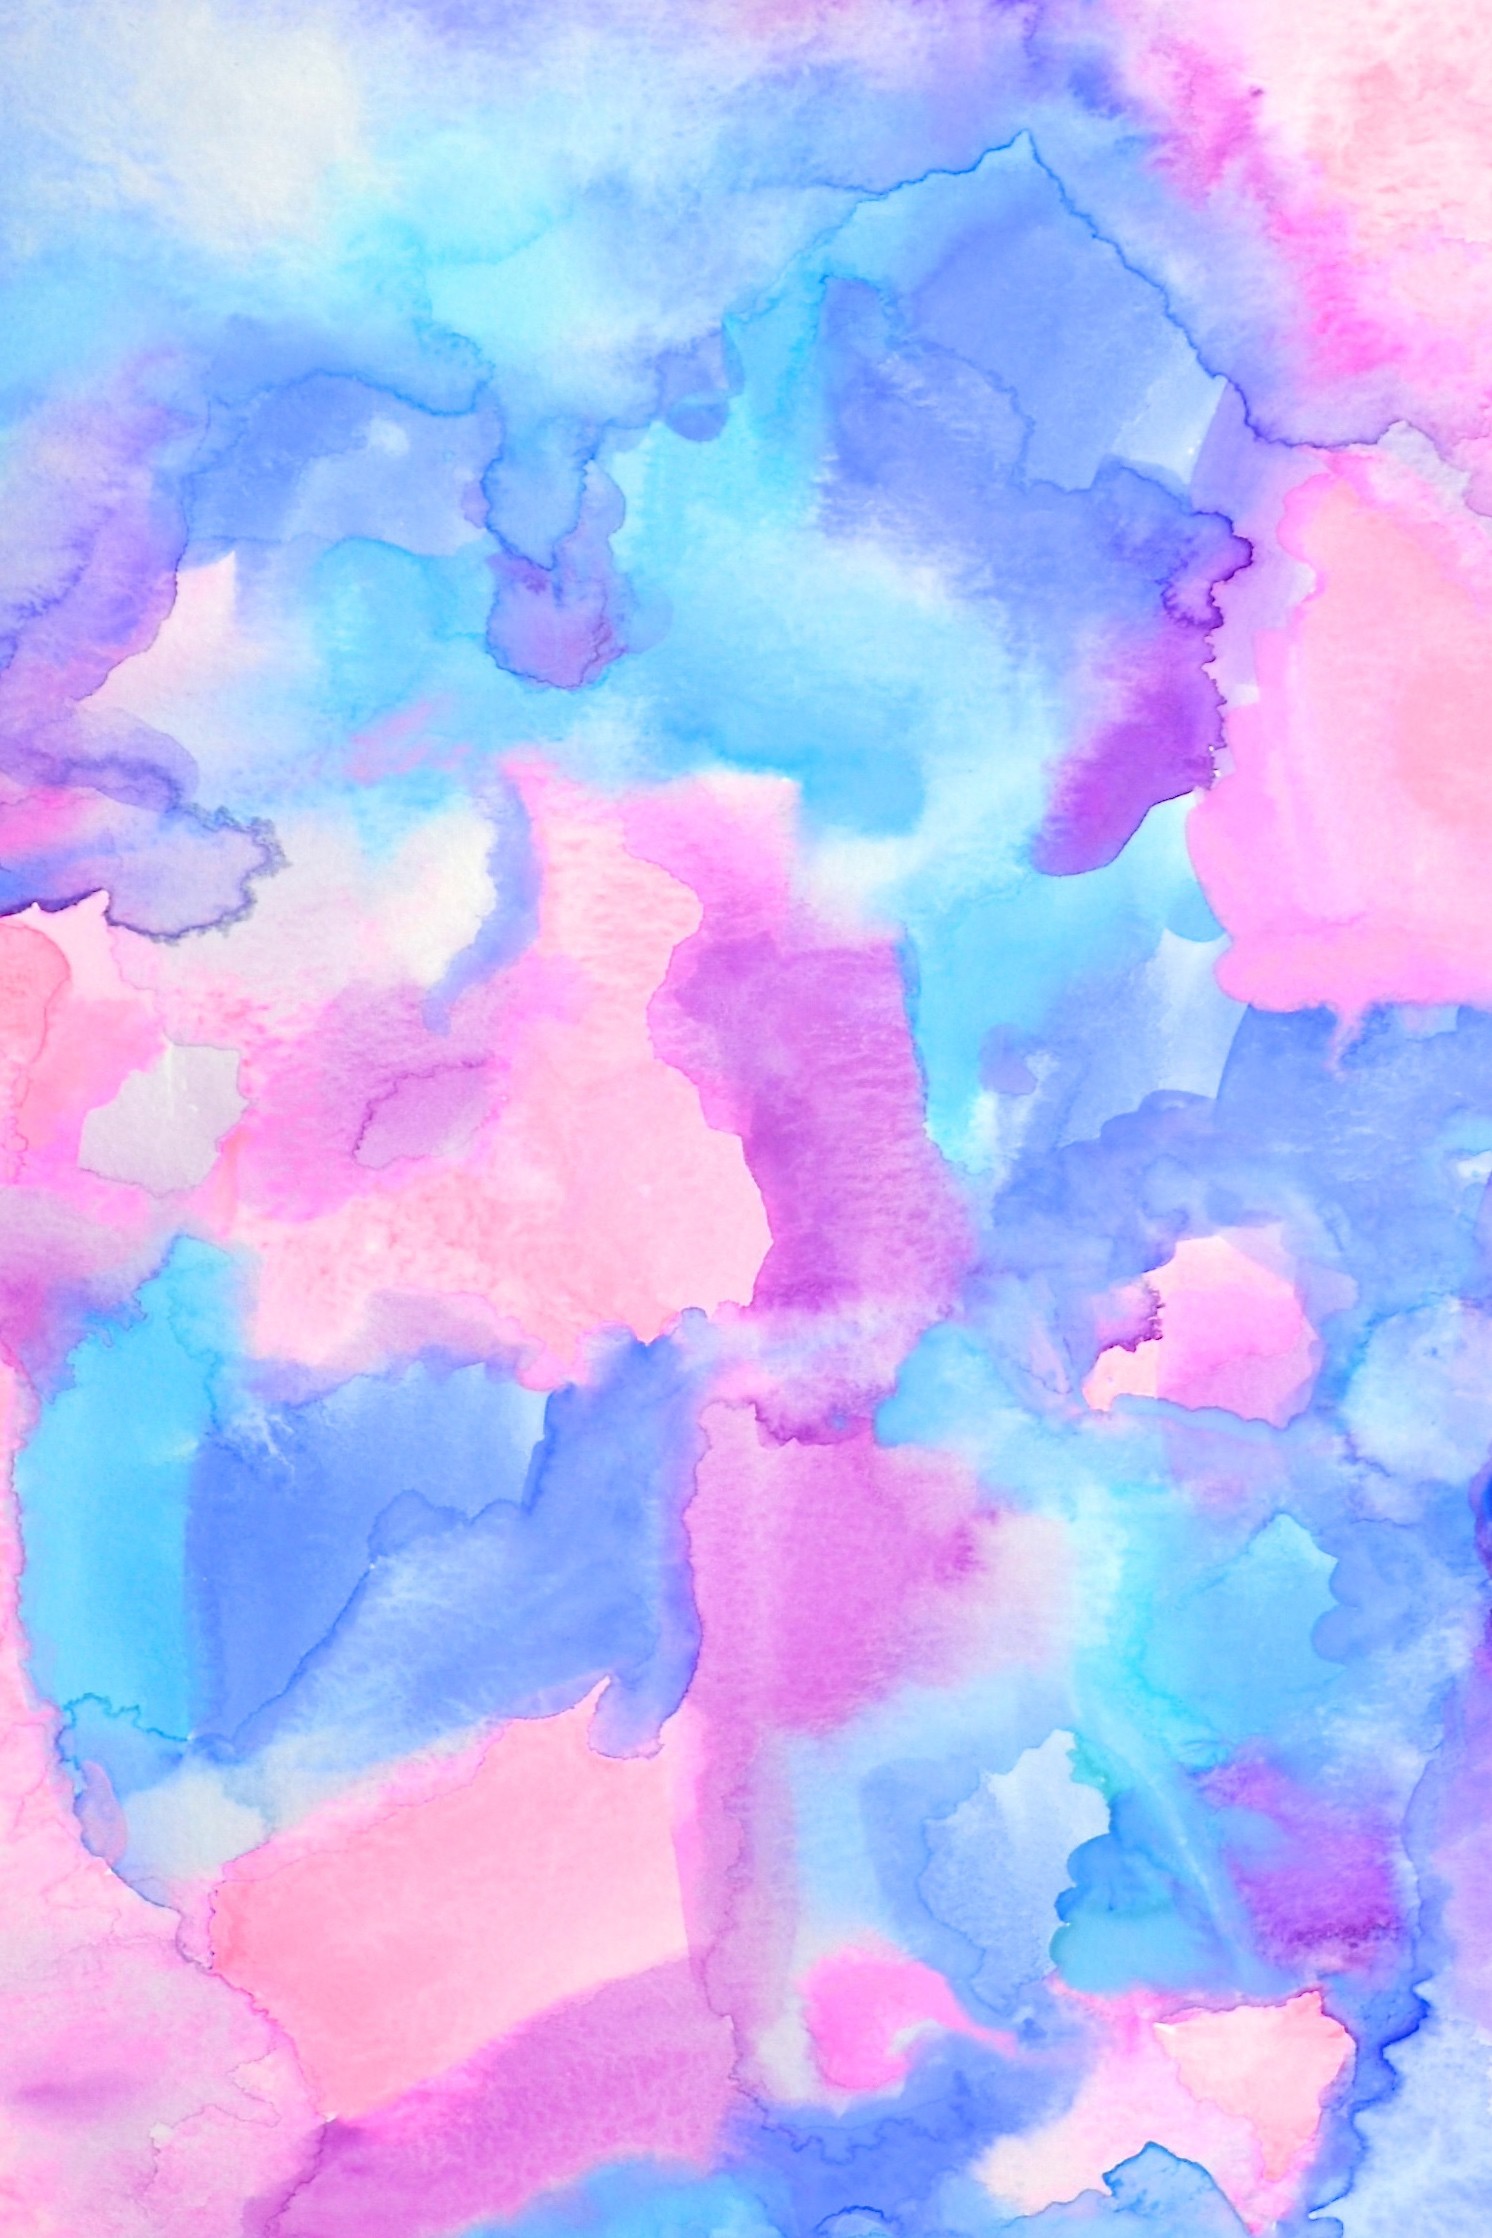 Ambrosia - Sky Blue And Pink - HD Wallpaper 